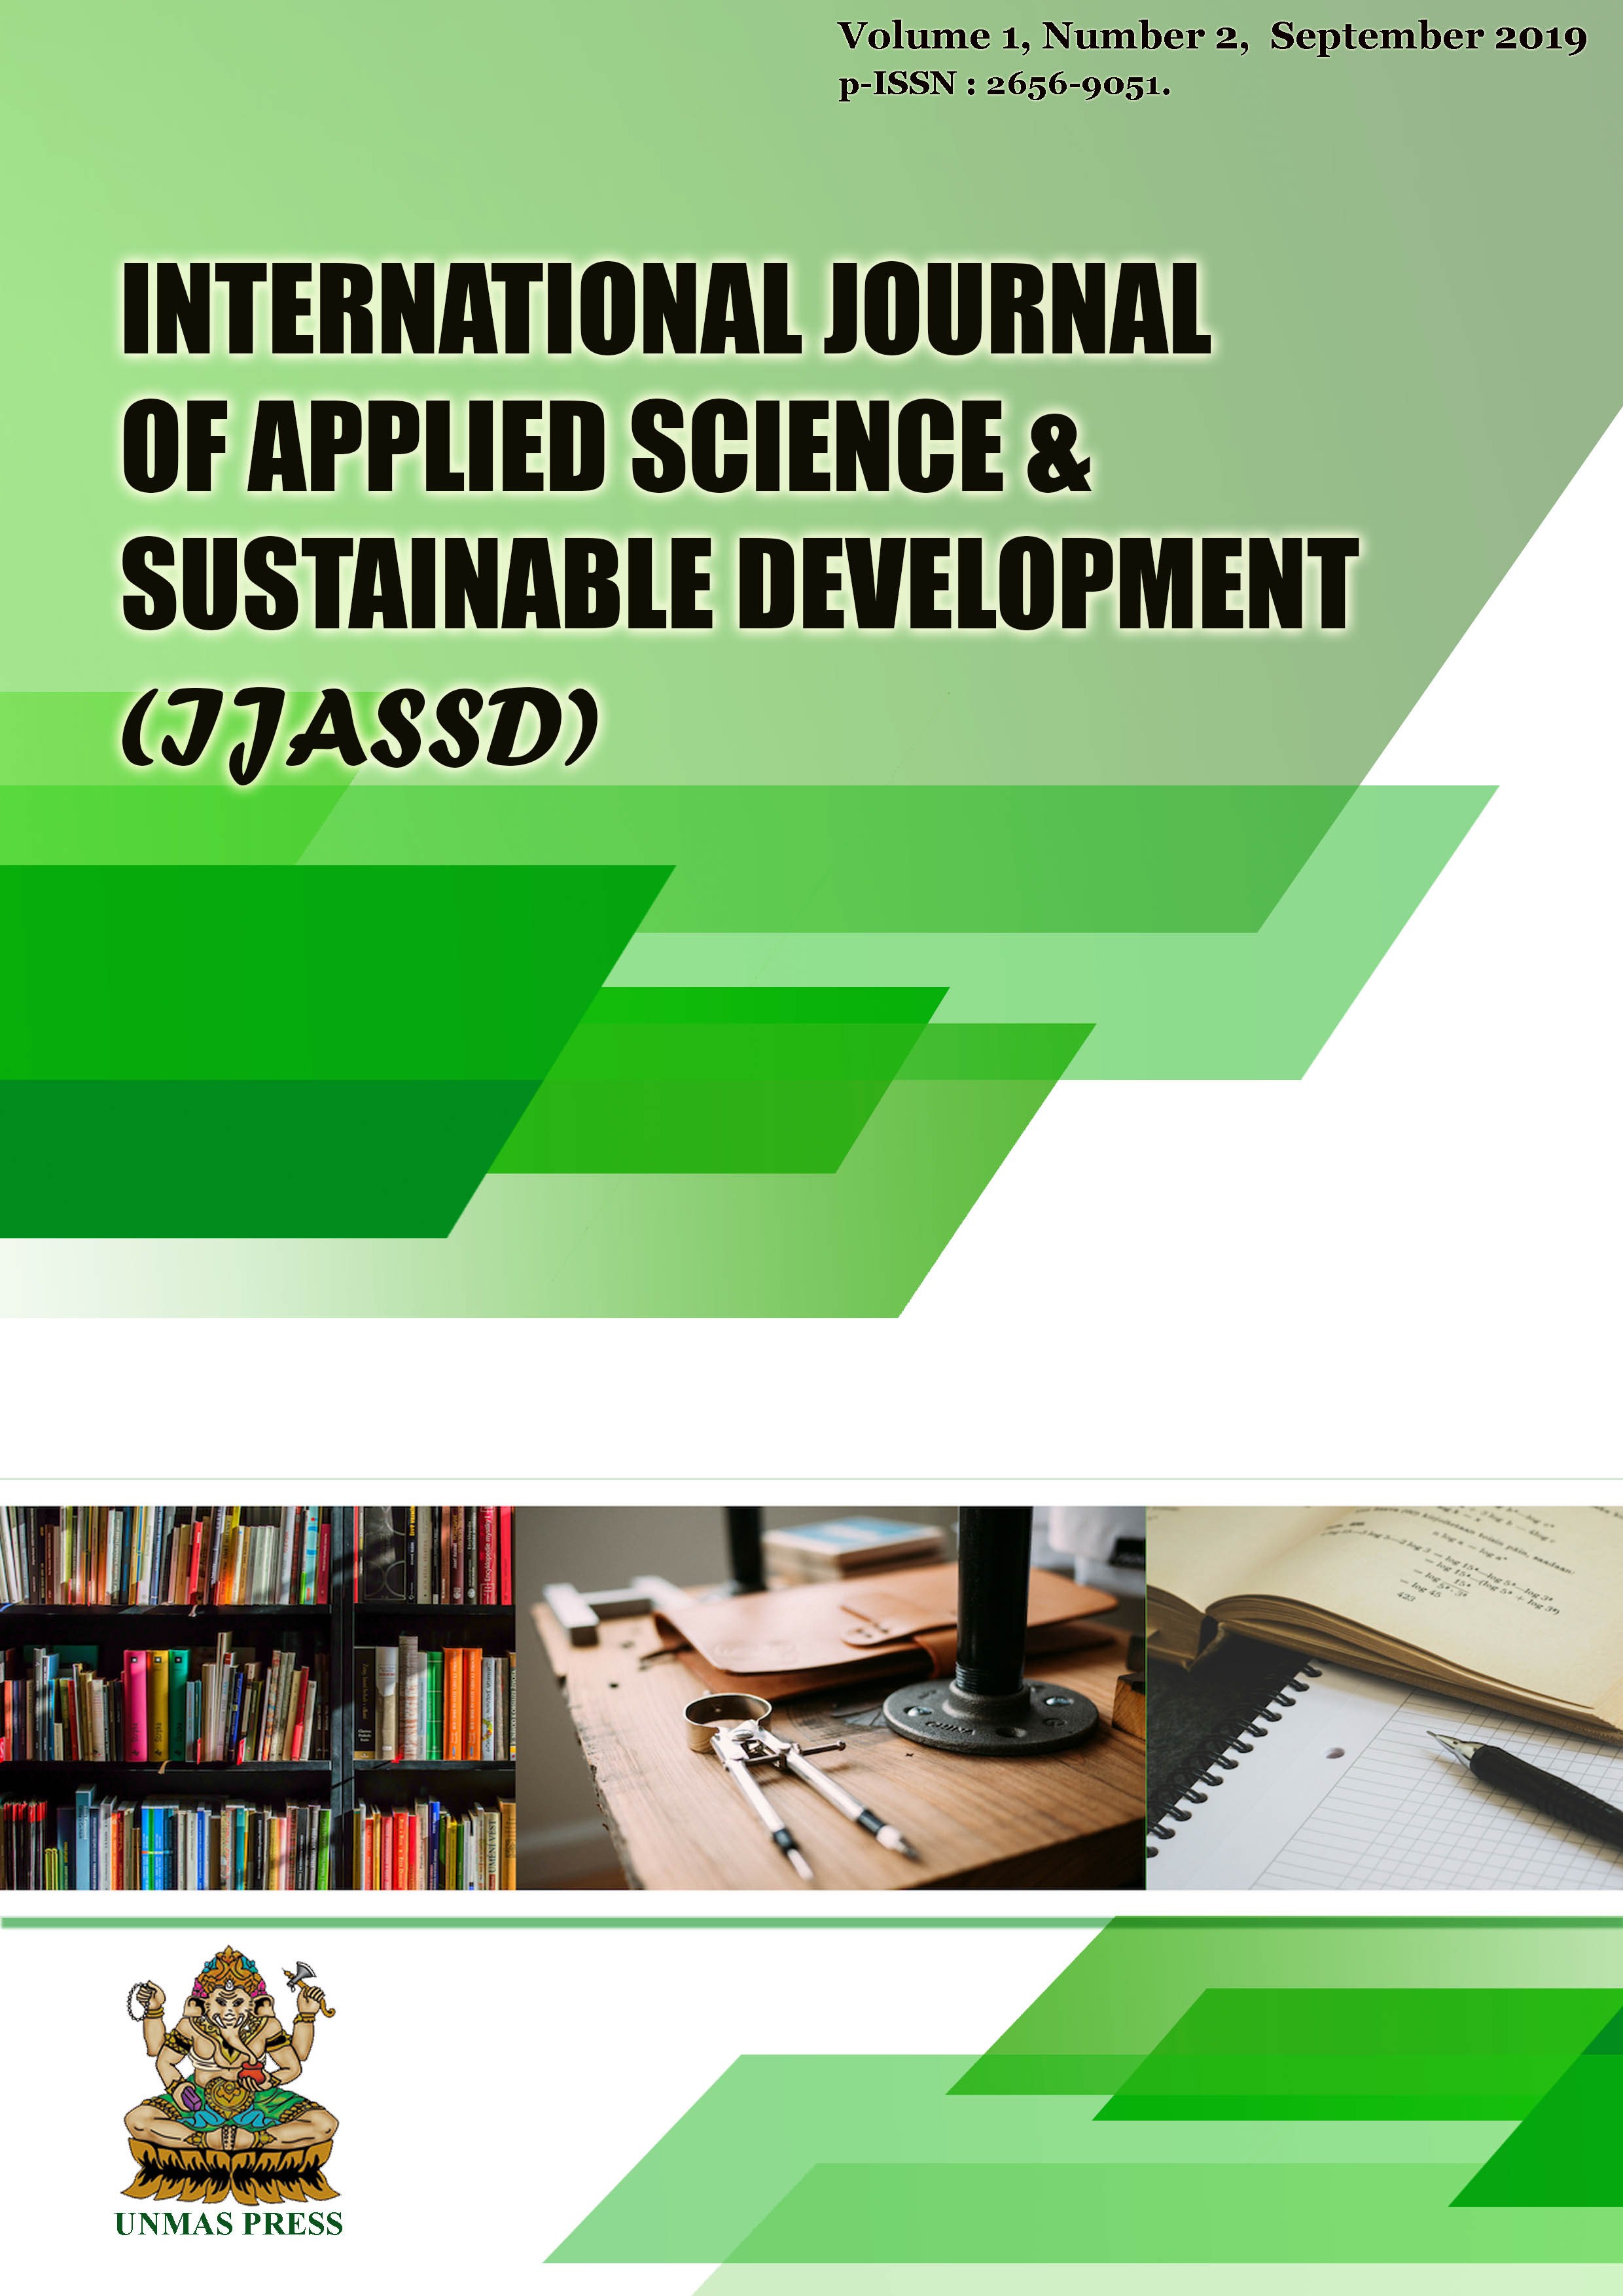 					View Vol. 1 No. 2 (2019): International Journal of Applied Science and Sustainable Development (IJASSD)
				